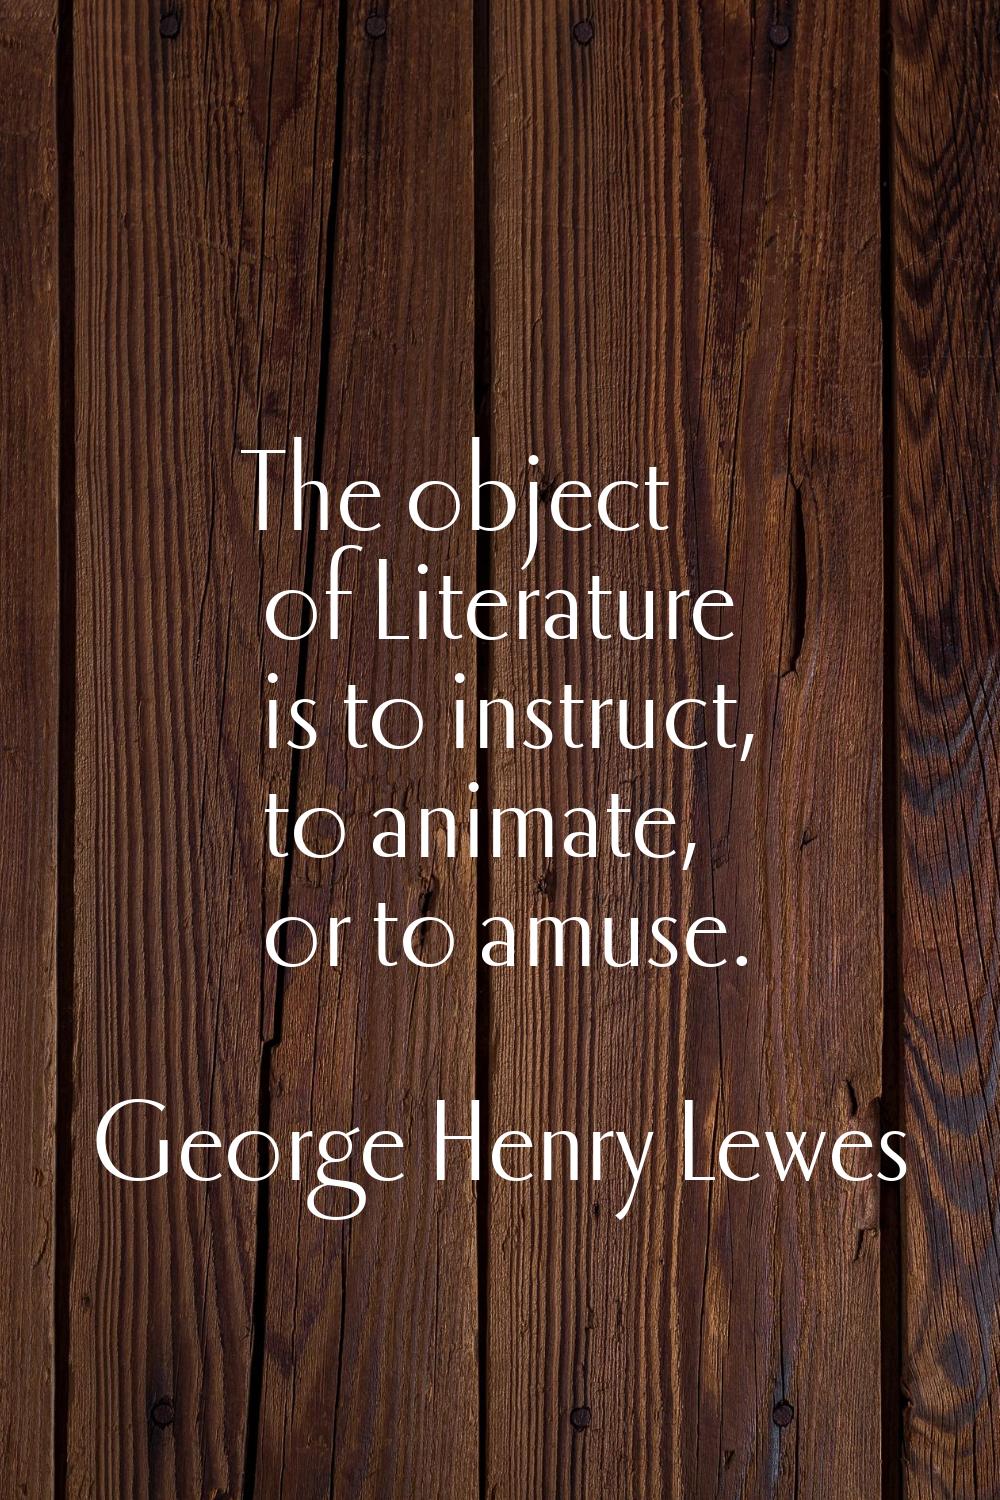 The object of Literature is to instruct, to animate, or to amuse.